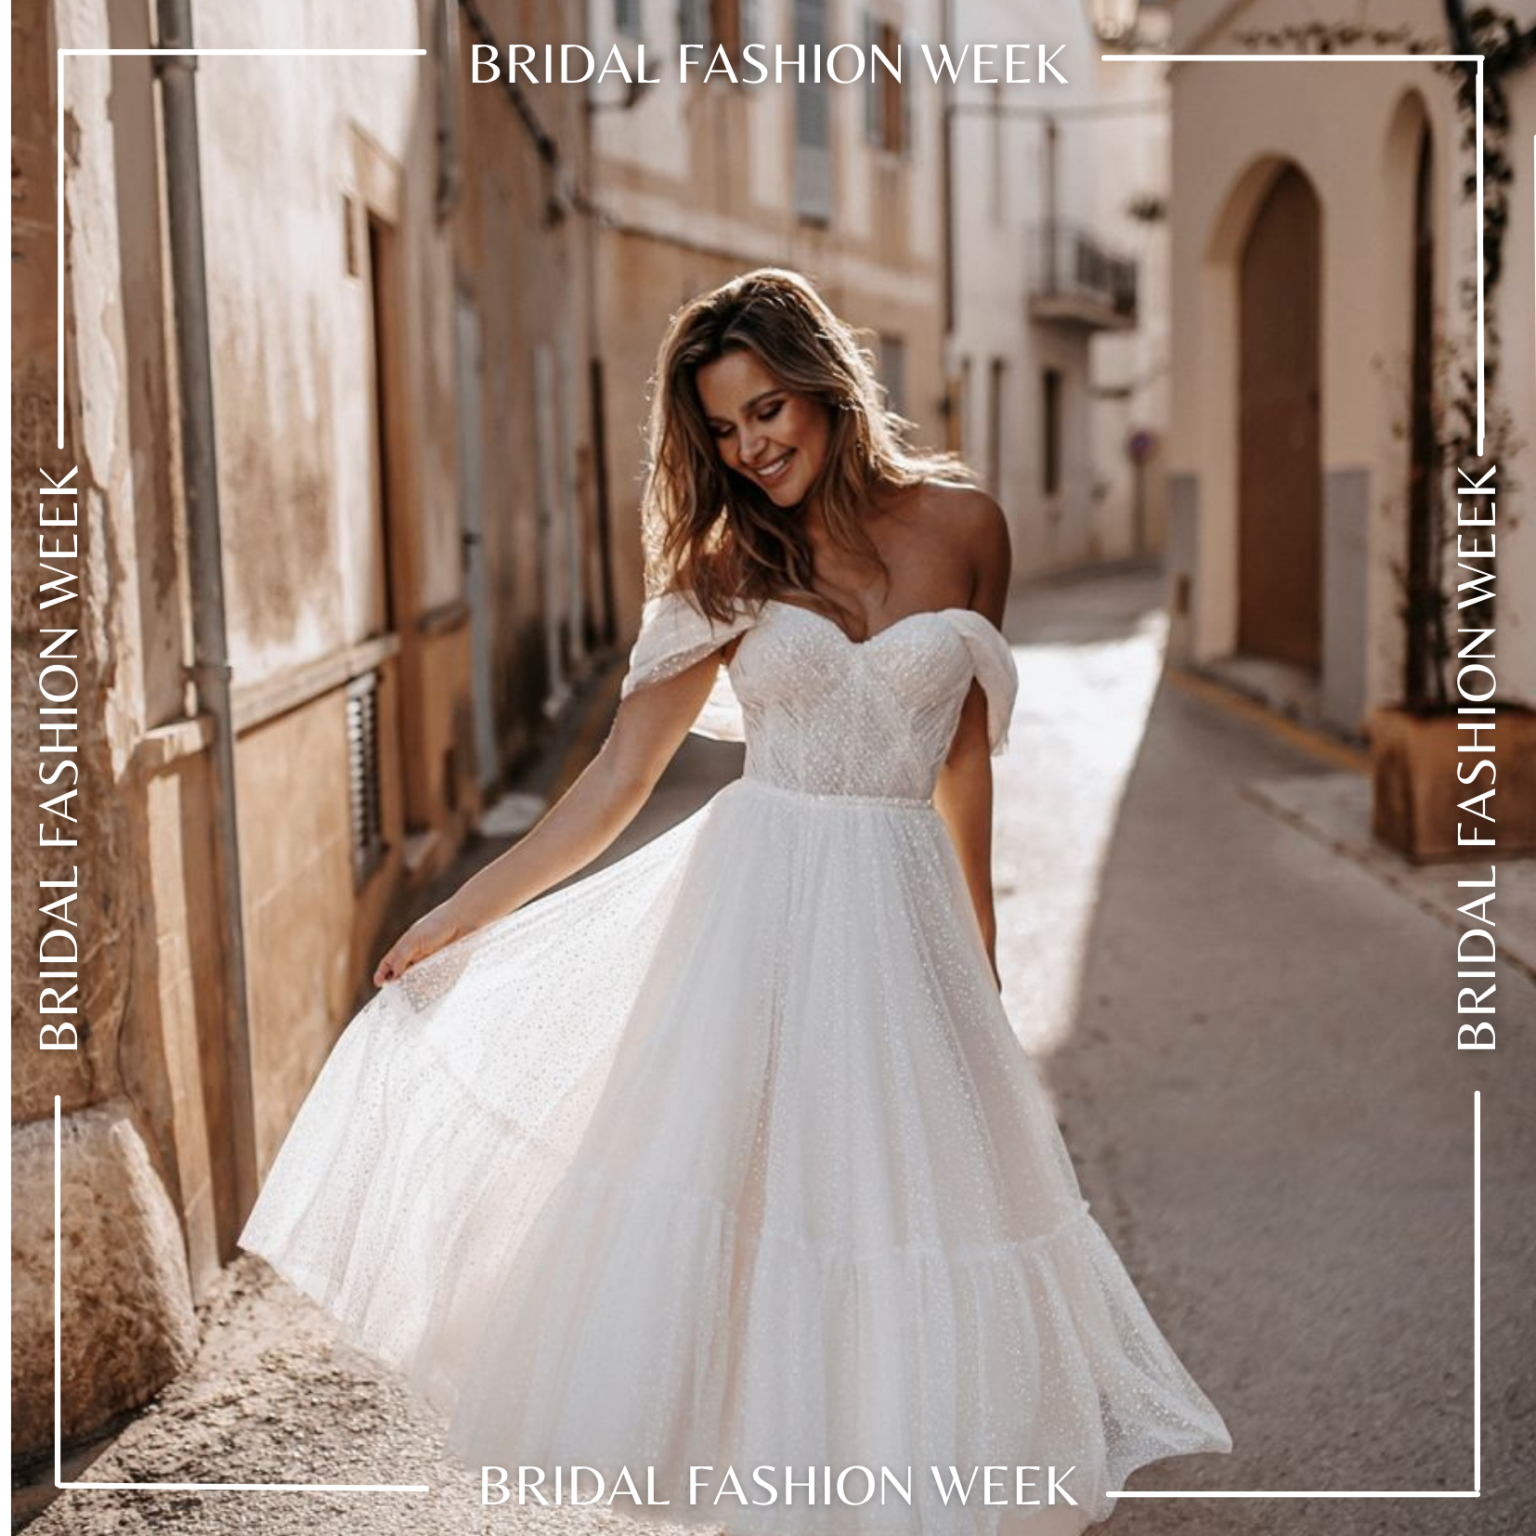 9 Chic Short Wedding Dresses For The ...